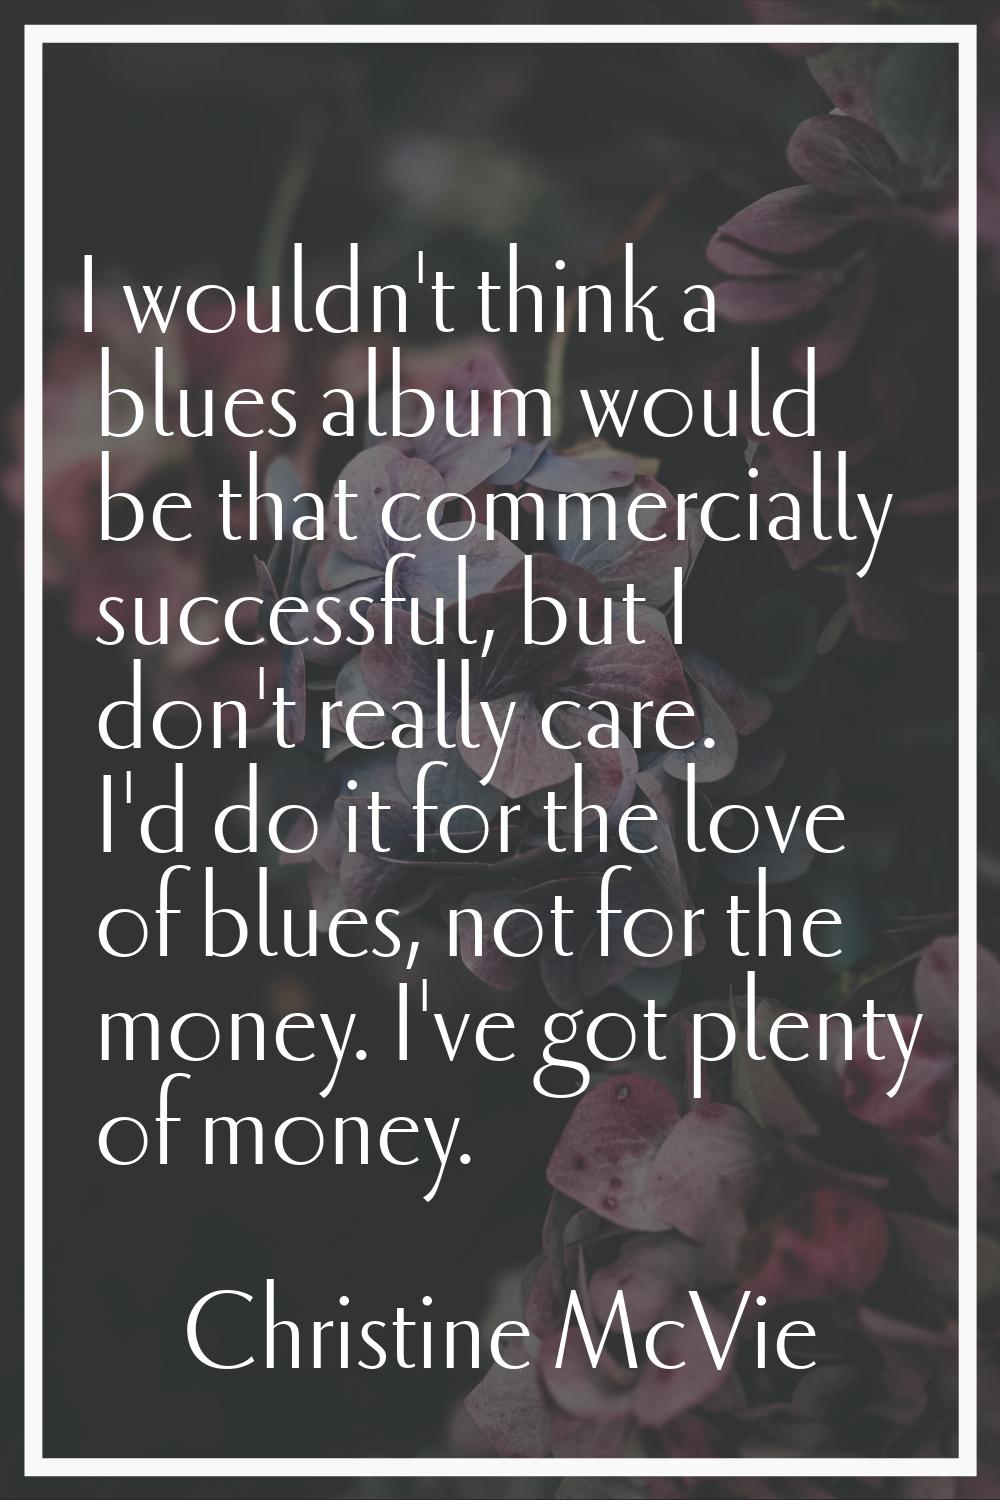 I wouldn't think a blues album would be that commercially successful, but I don't really care. I'd 